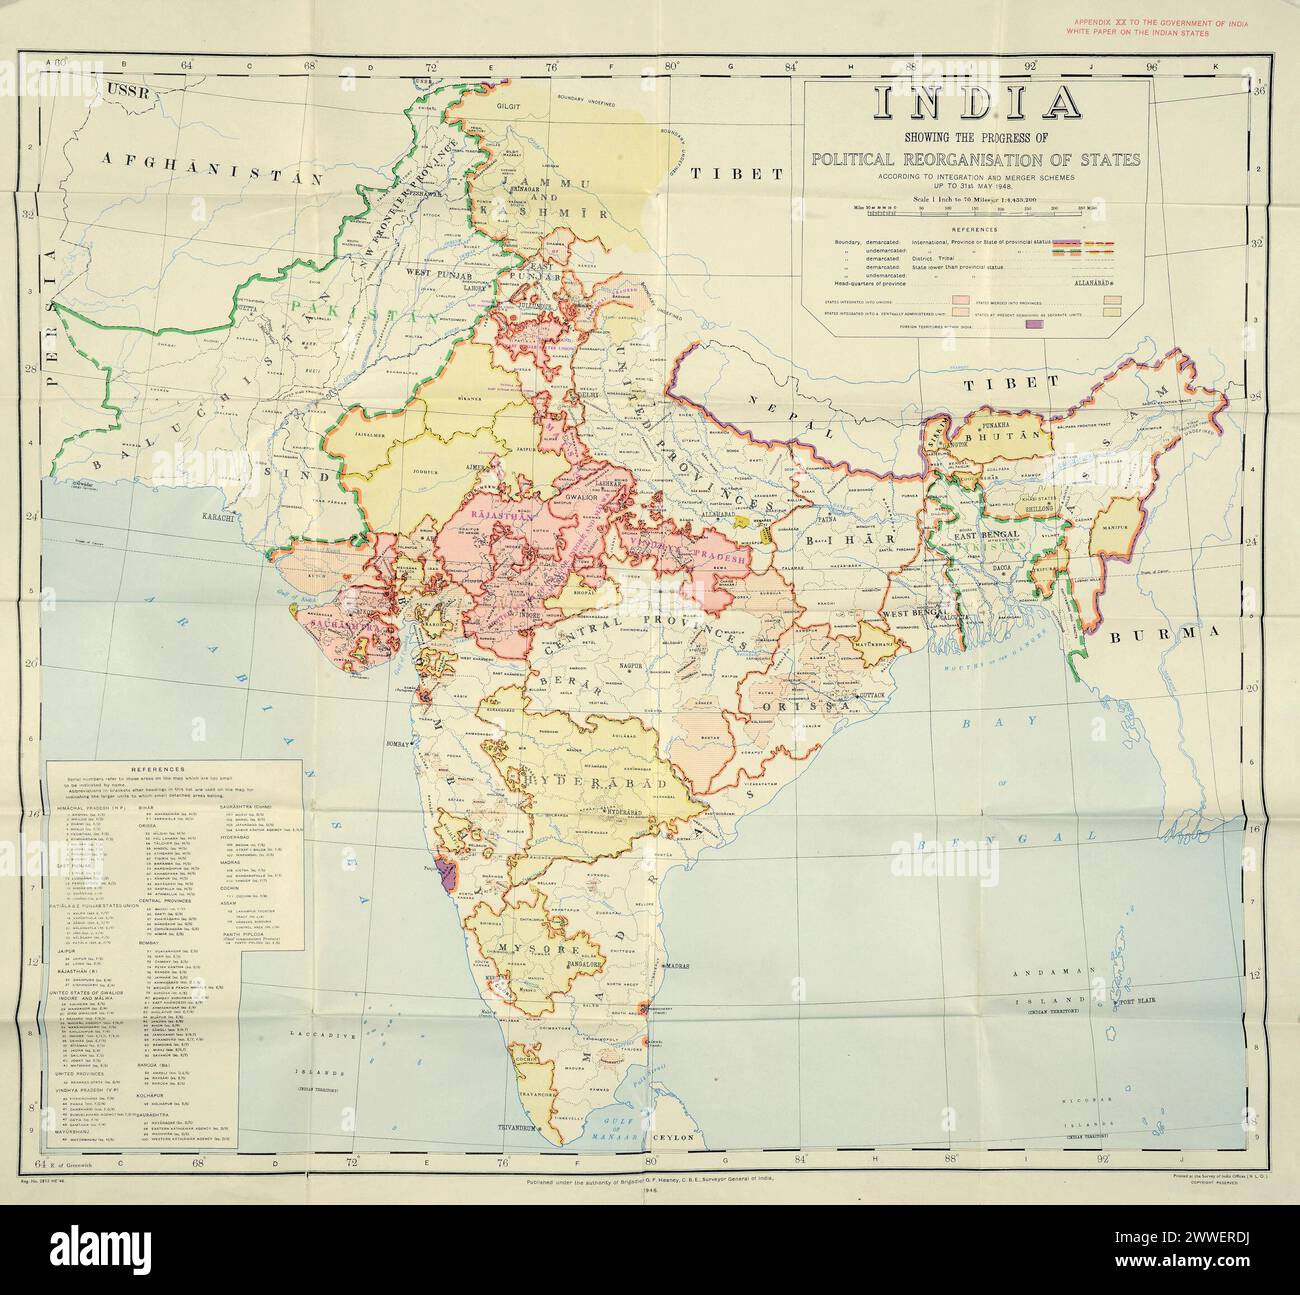 Map of the partition of British India Document: India's plan for uniting and merging Indian States, 1948. Catalogue Ref: DO 142/484 (1) Description: This map illustrates the new borders that resulted from the partition of British India. The partition of British India happened in August 1947 when the British government withdrew after almost two hundred years of British rule. It is called 'partition' because this withdrawal resulted in two new independent nations: India and Pakistan. The borders of these new countries were based on religious majorities and went straight through existing province Stock Photo